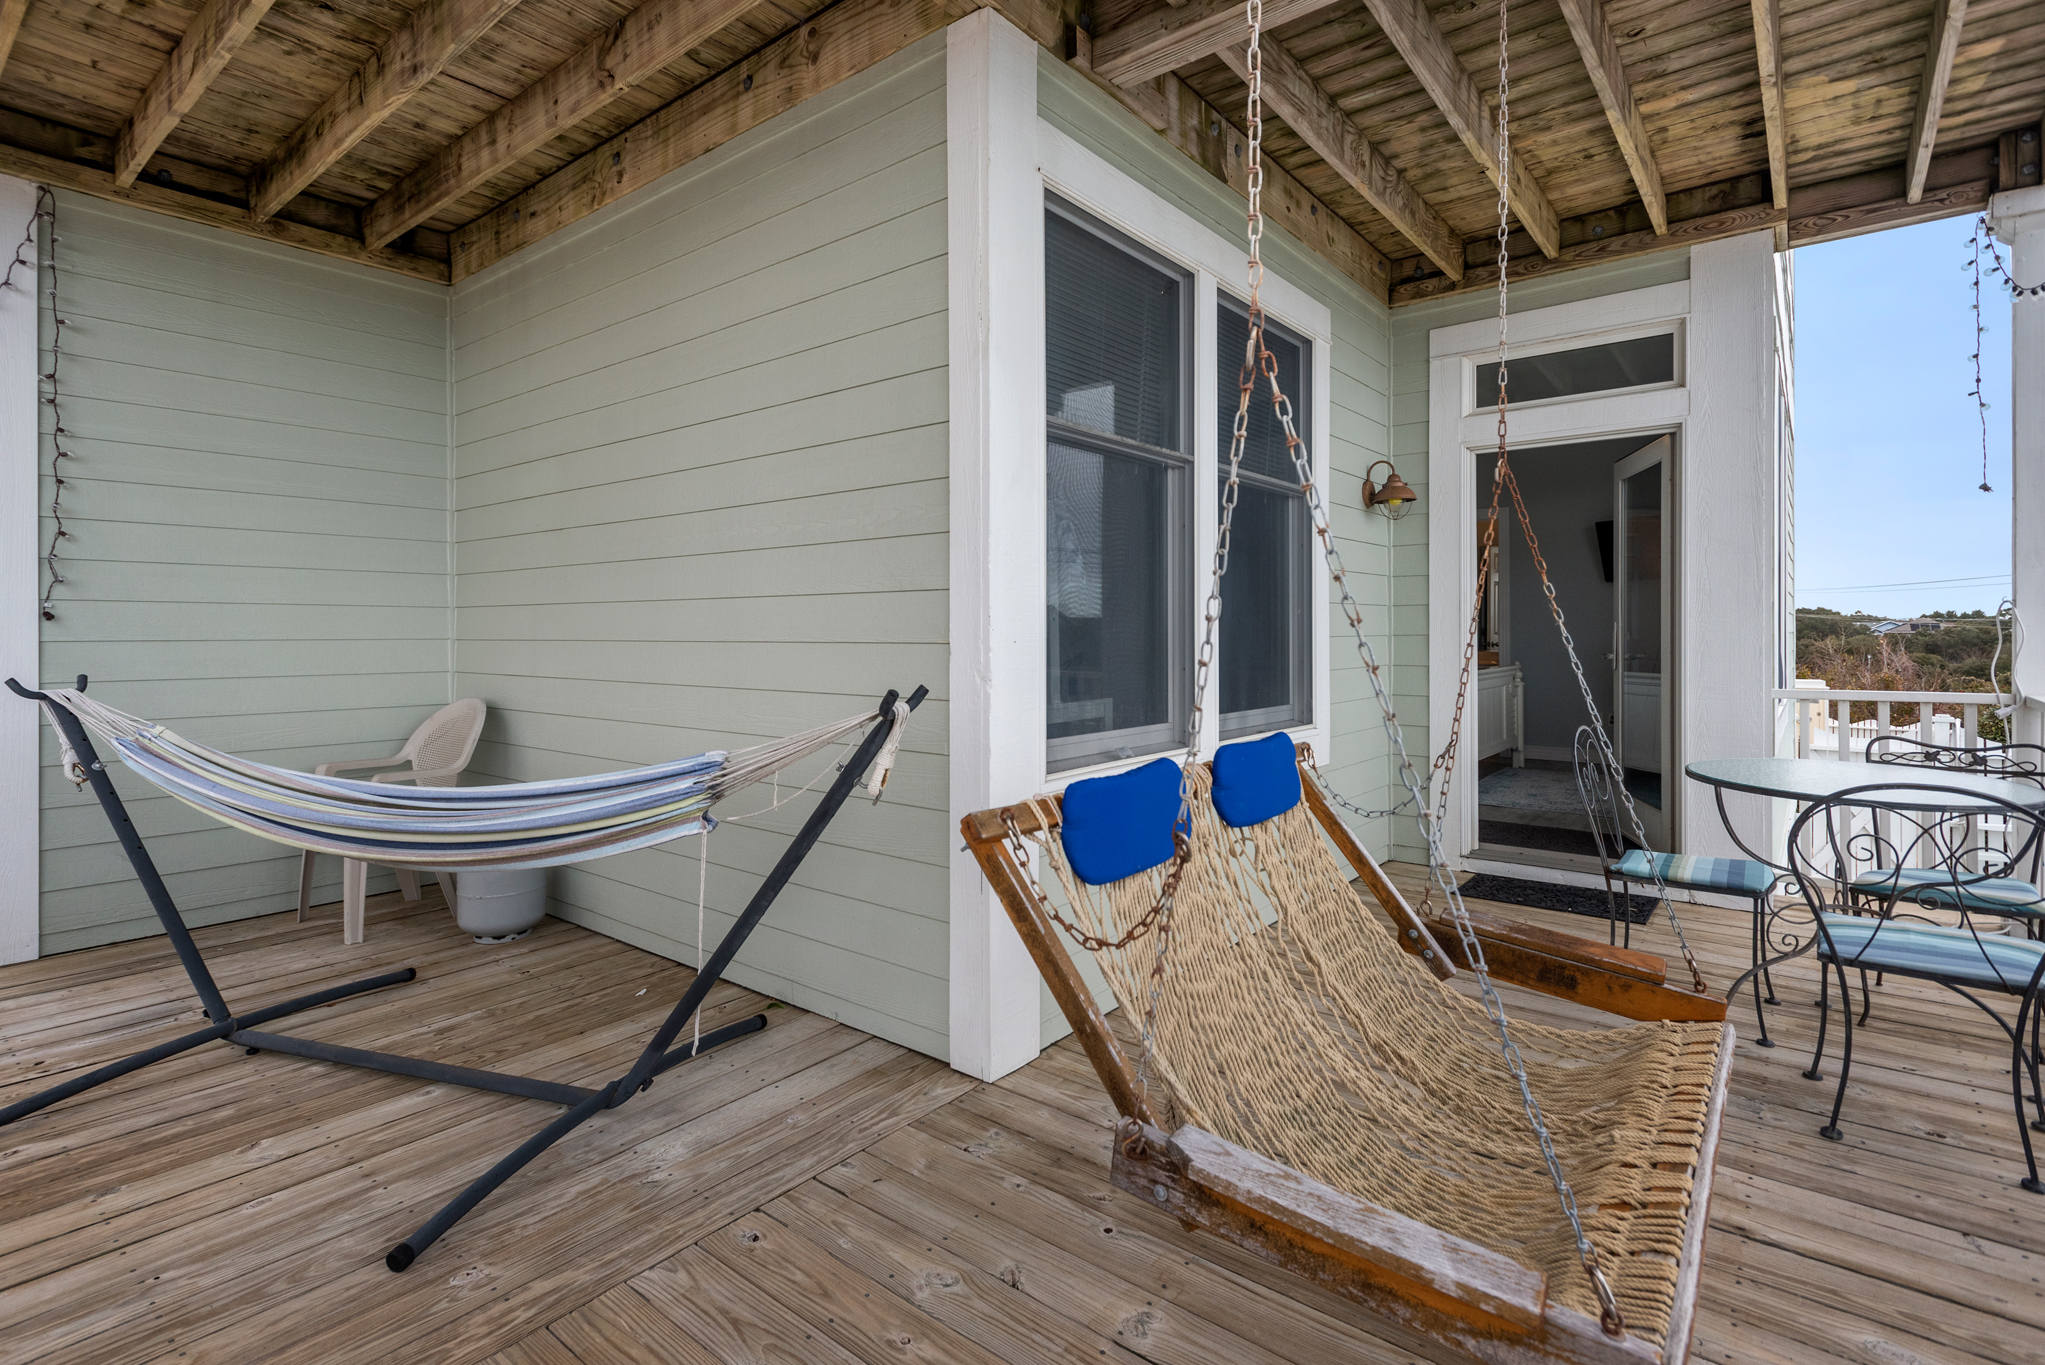 HK29: Beachin' Up With The Jones's | Bottom Level Covered Deck